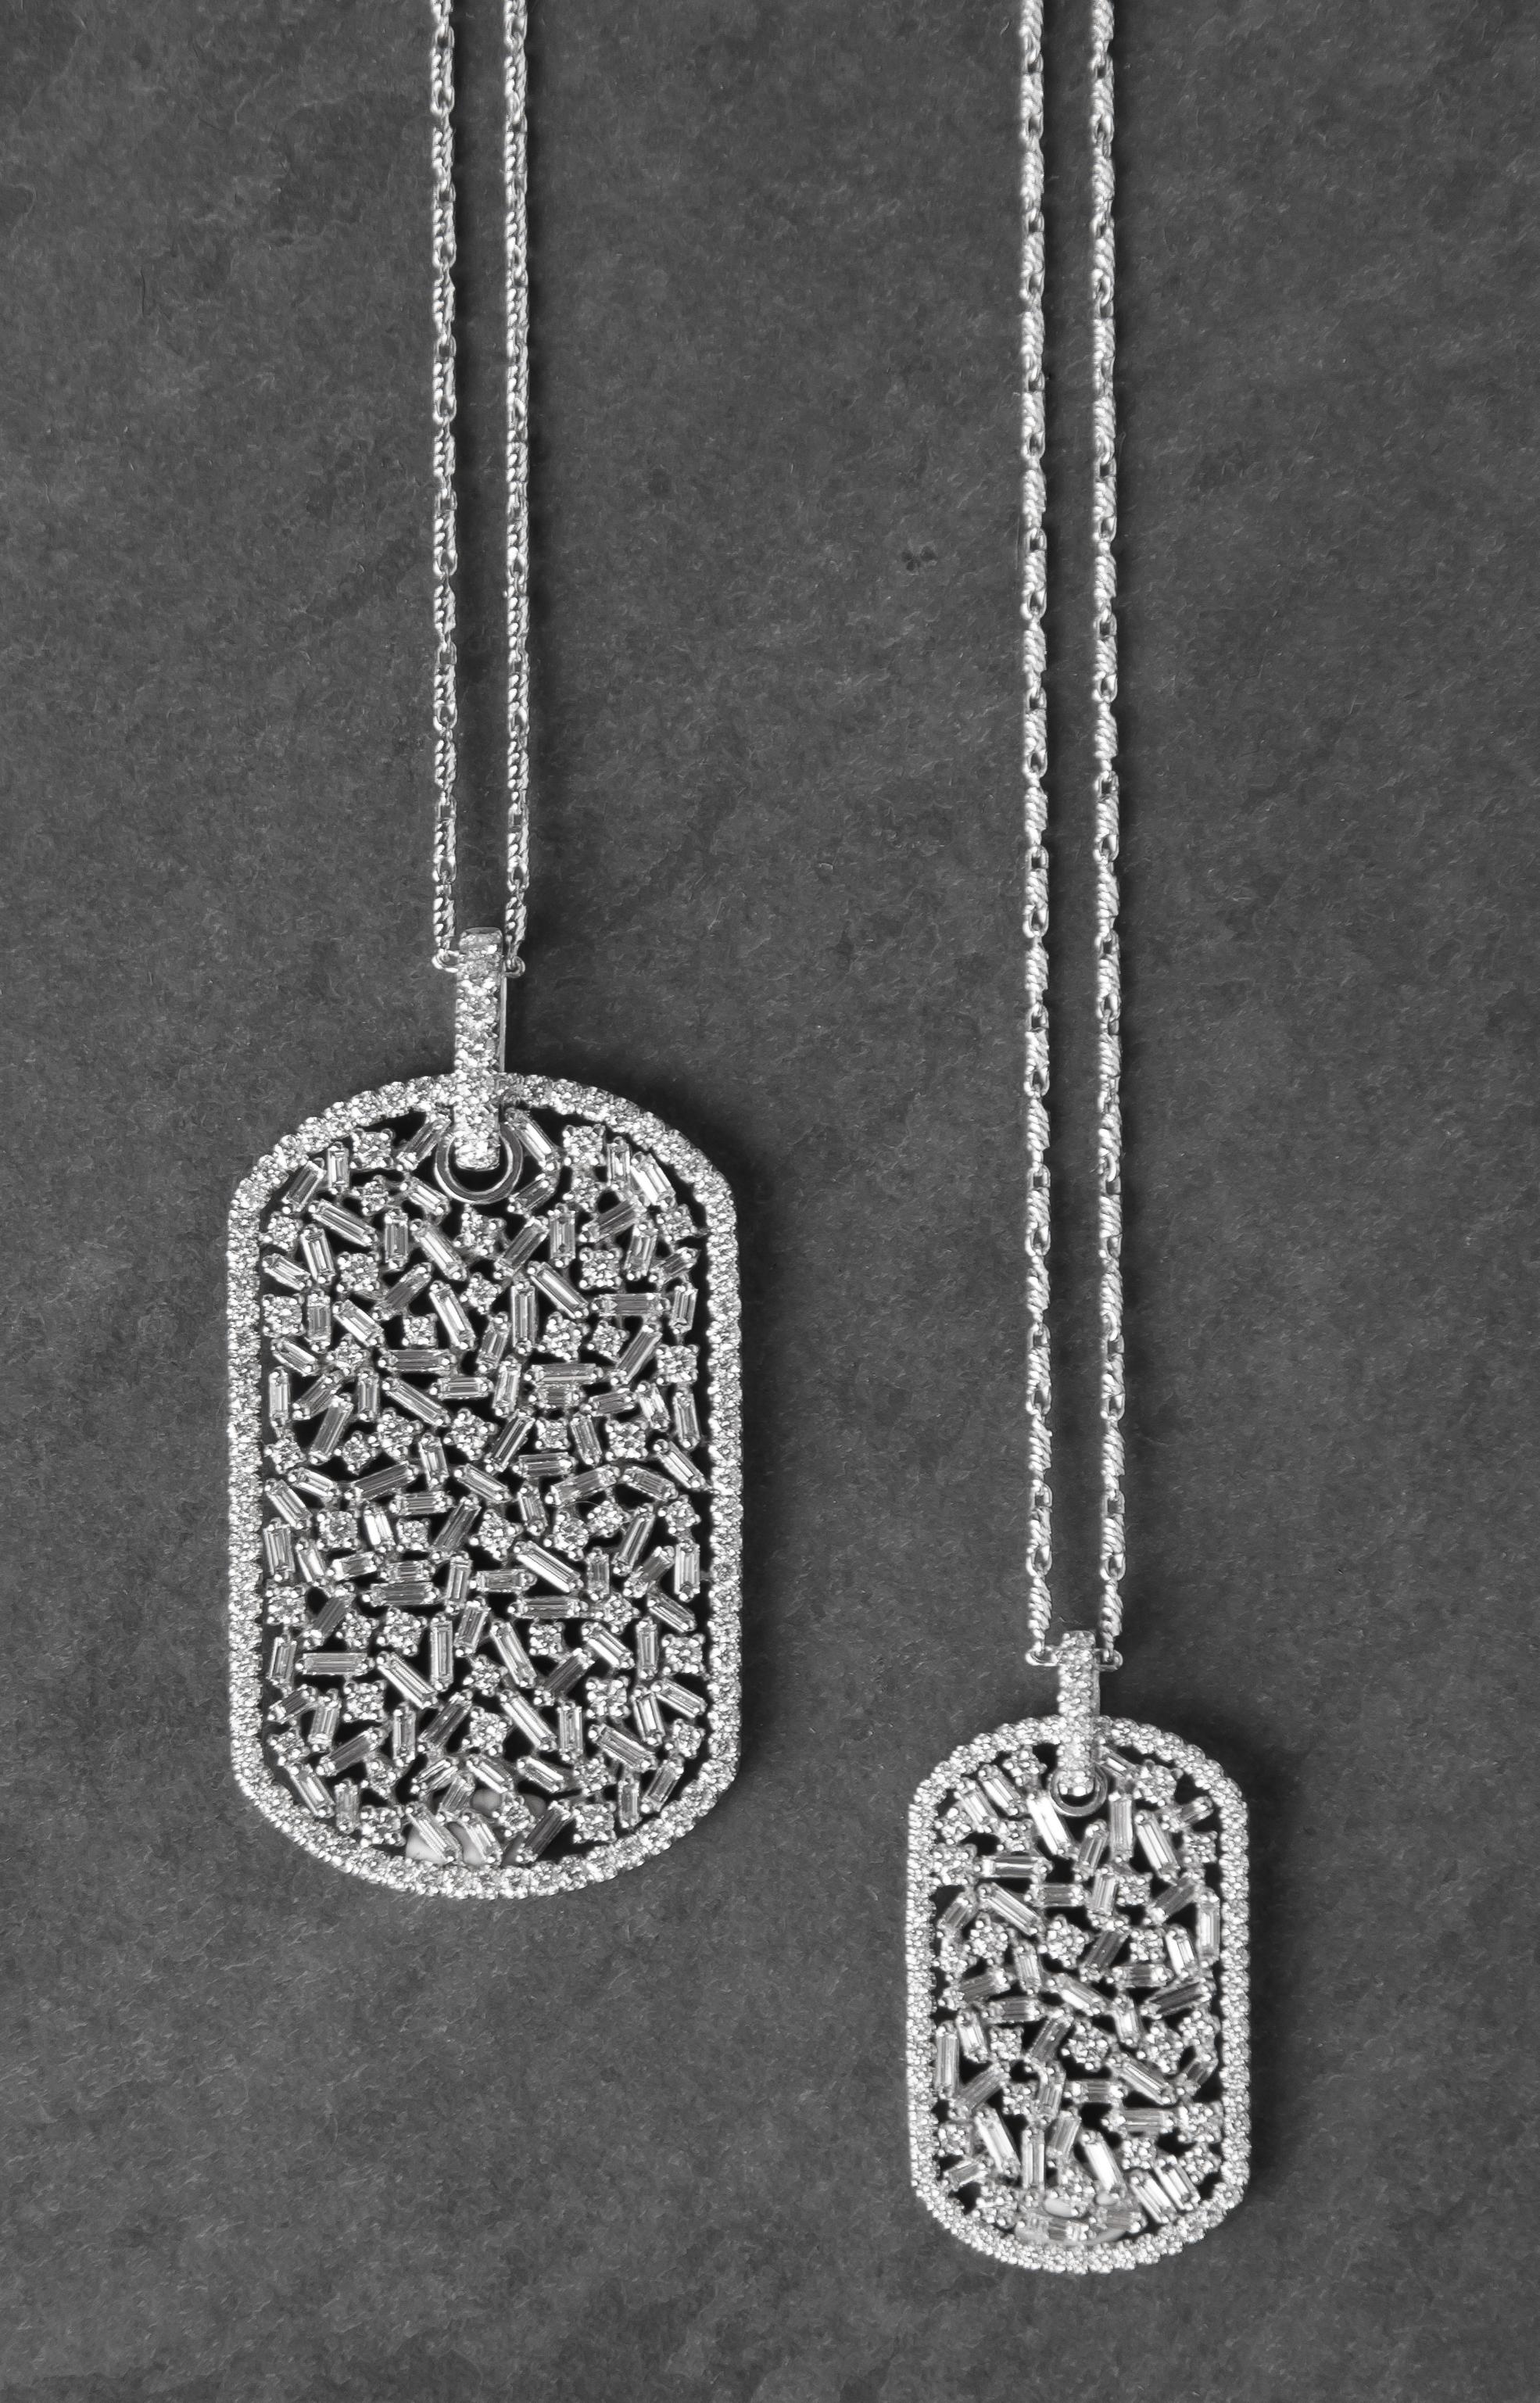 Designed as a military-style dog tag, but with a distinctly feminine flair, this medium pendant is crafted of white gold and set with round and baguette diamonds in a fireworks setting.

Pendant measures 1.1” long x 0.6” wide and is composed of